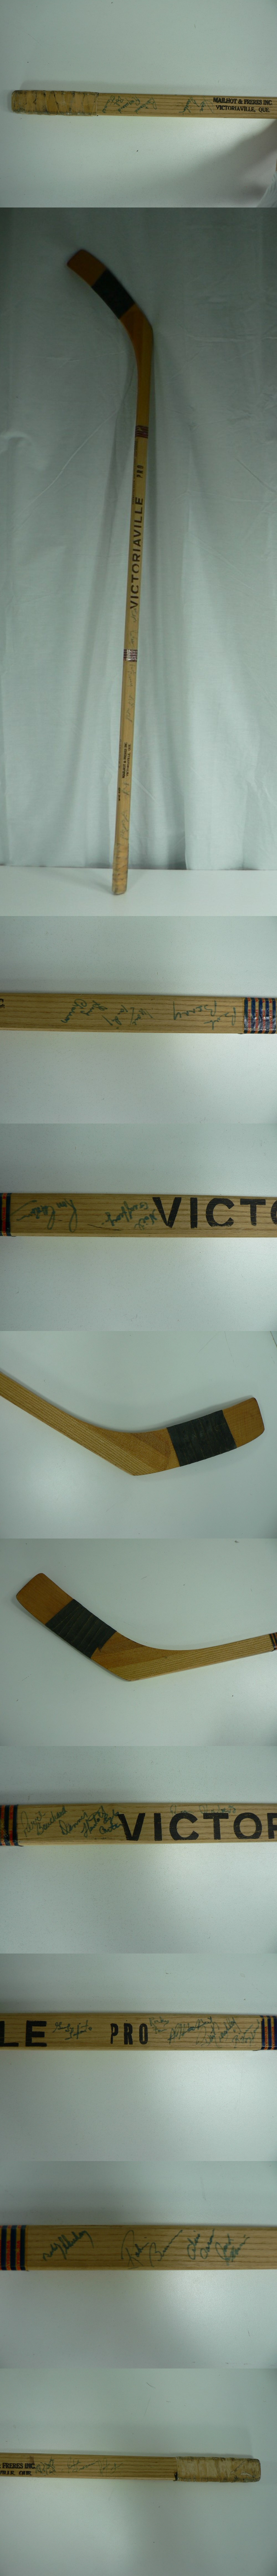 1970'S ST. LOUIS BLUES P. ROBERTO GAME USED STICK TEAM AUTOGAPHED BY 24 photo